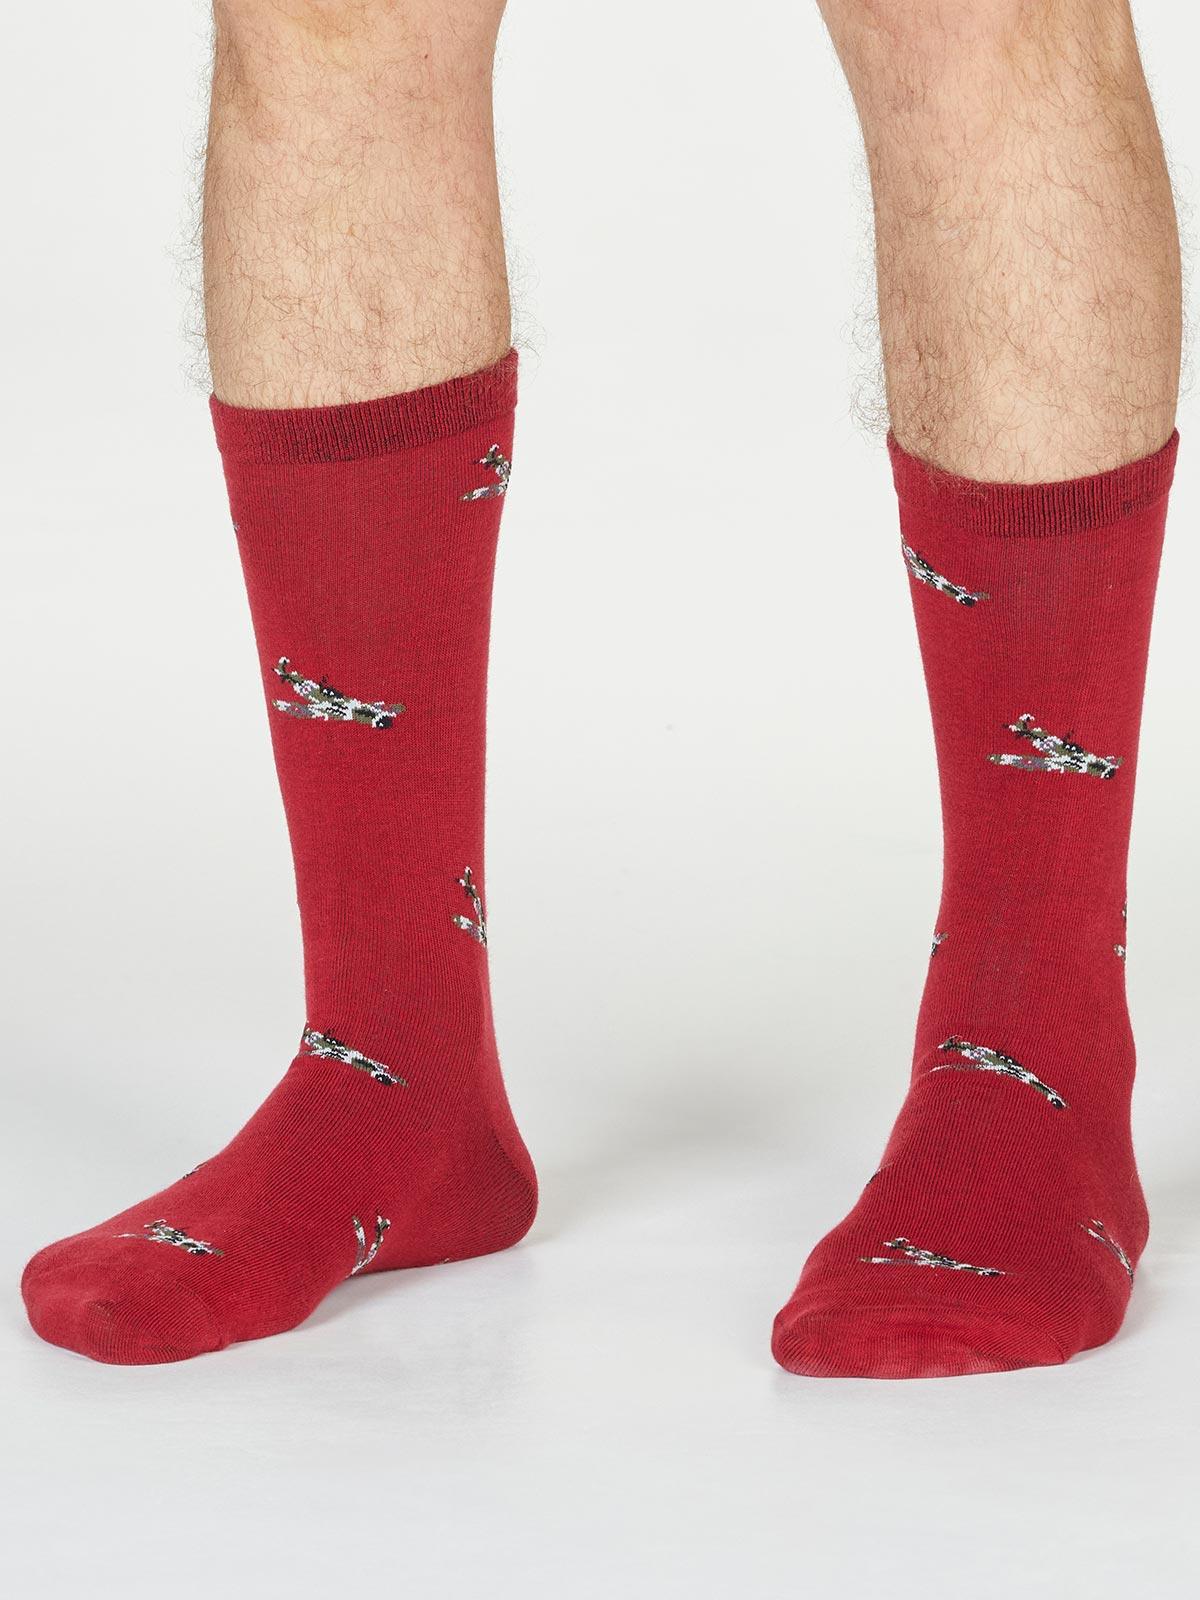 Judron Spitfire Socks - Pillarbox Red - Thought Clothing UK